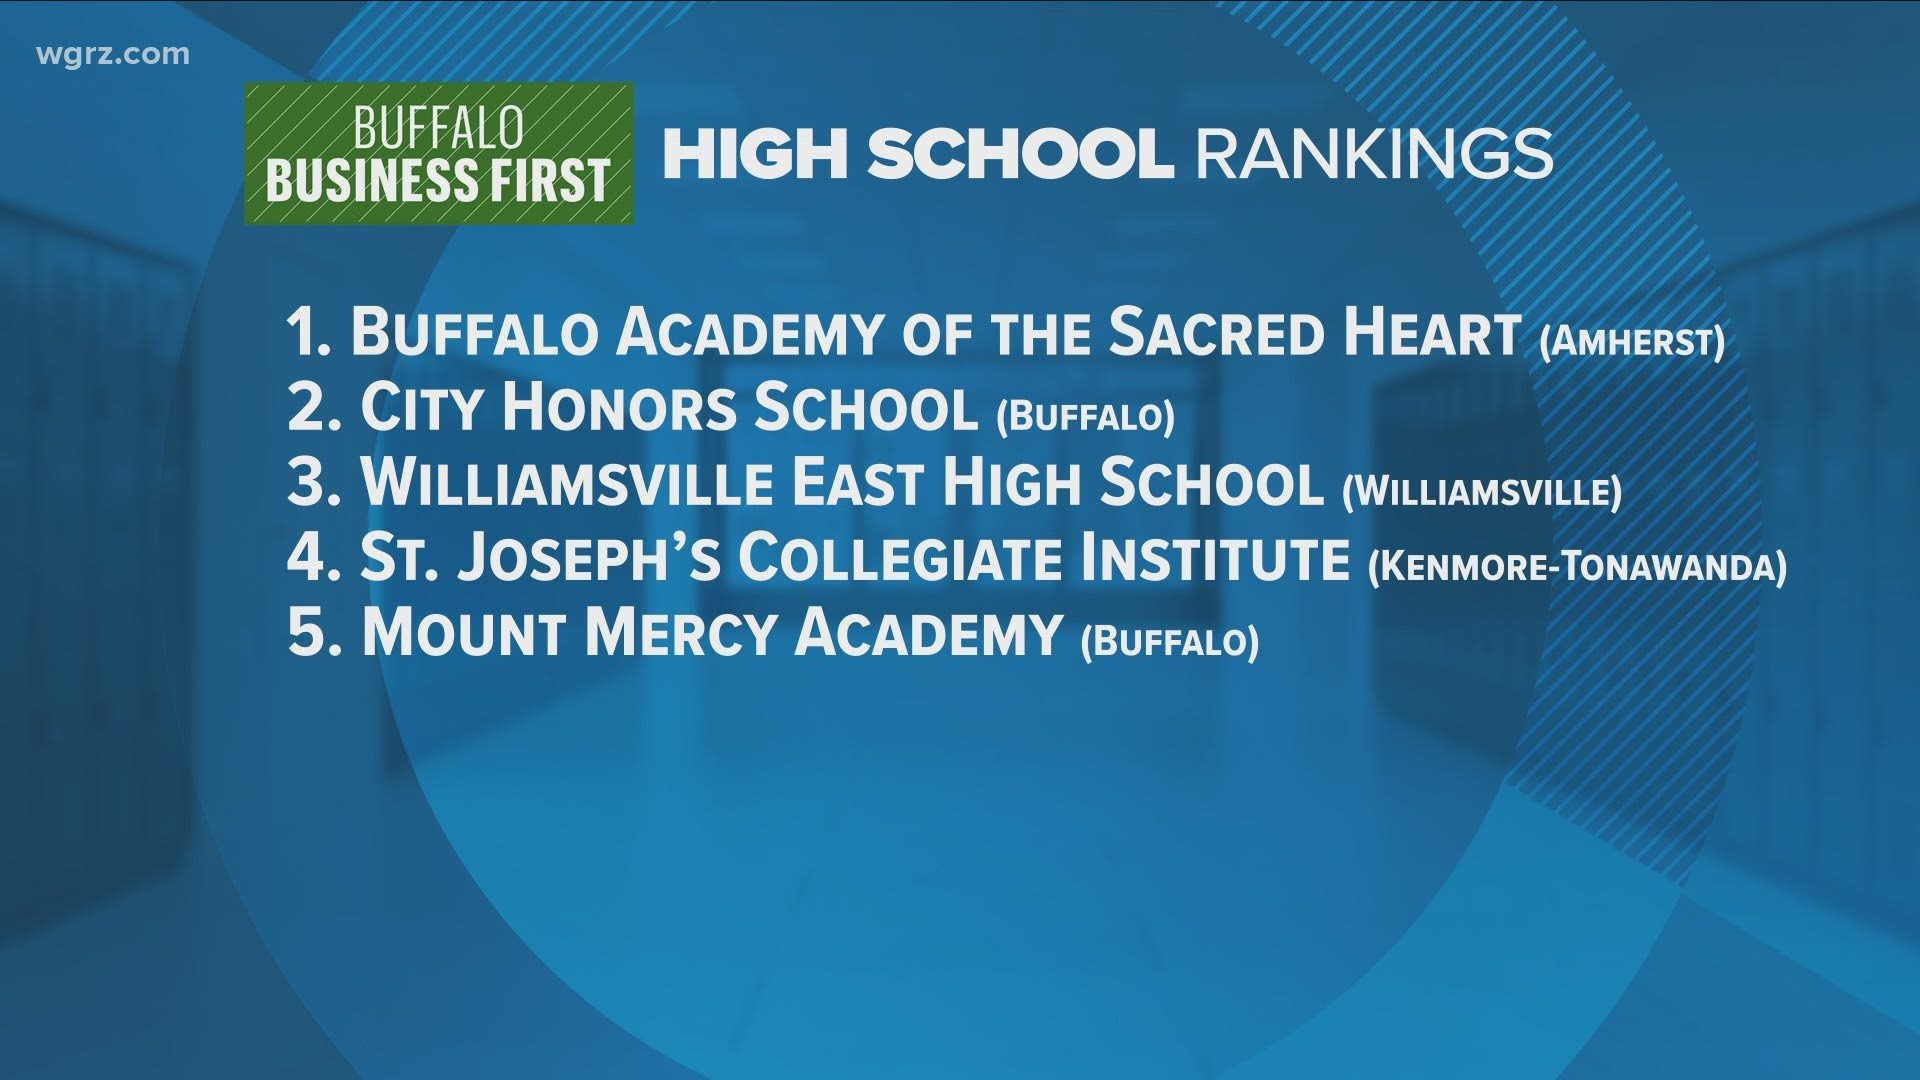 For the first time ever... Buffalo Academy of the Sacred Heart takes home the top high school spot.